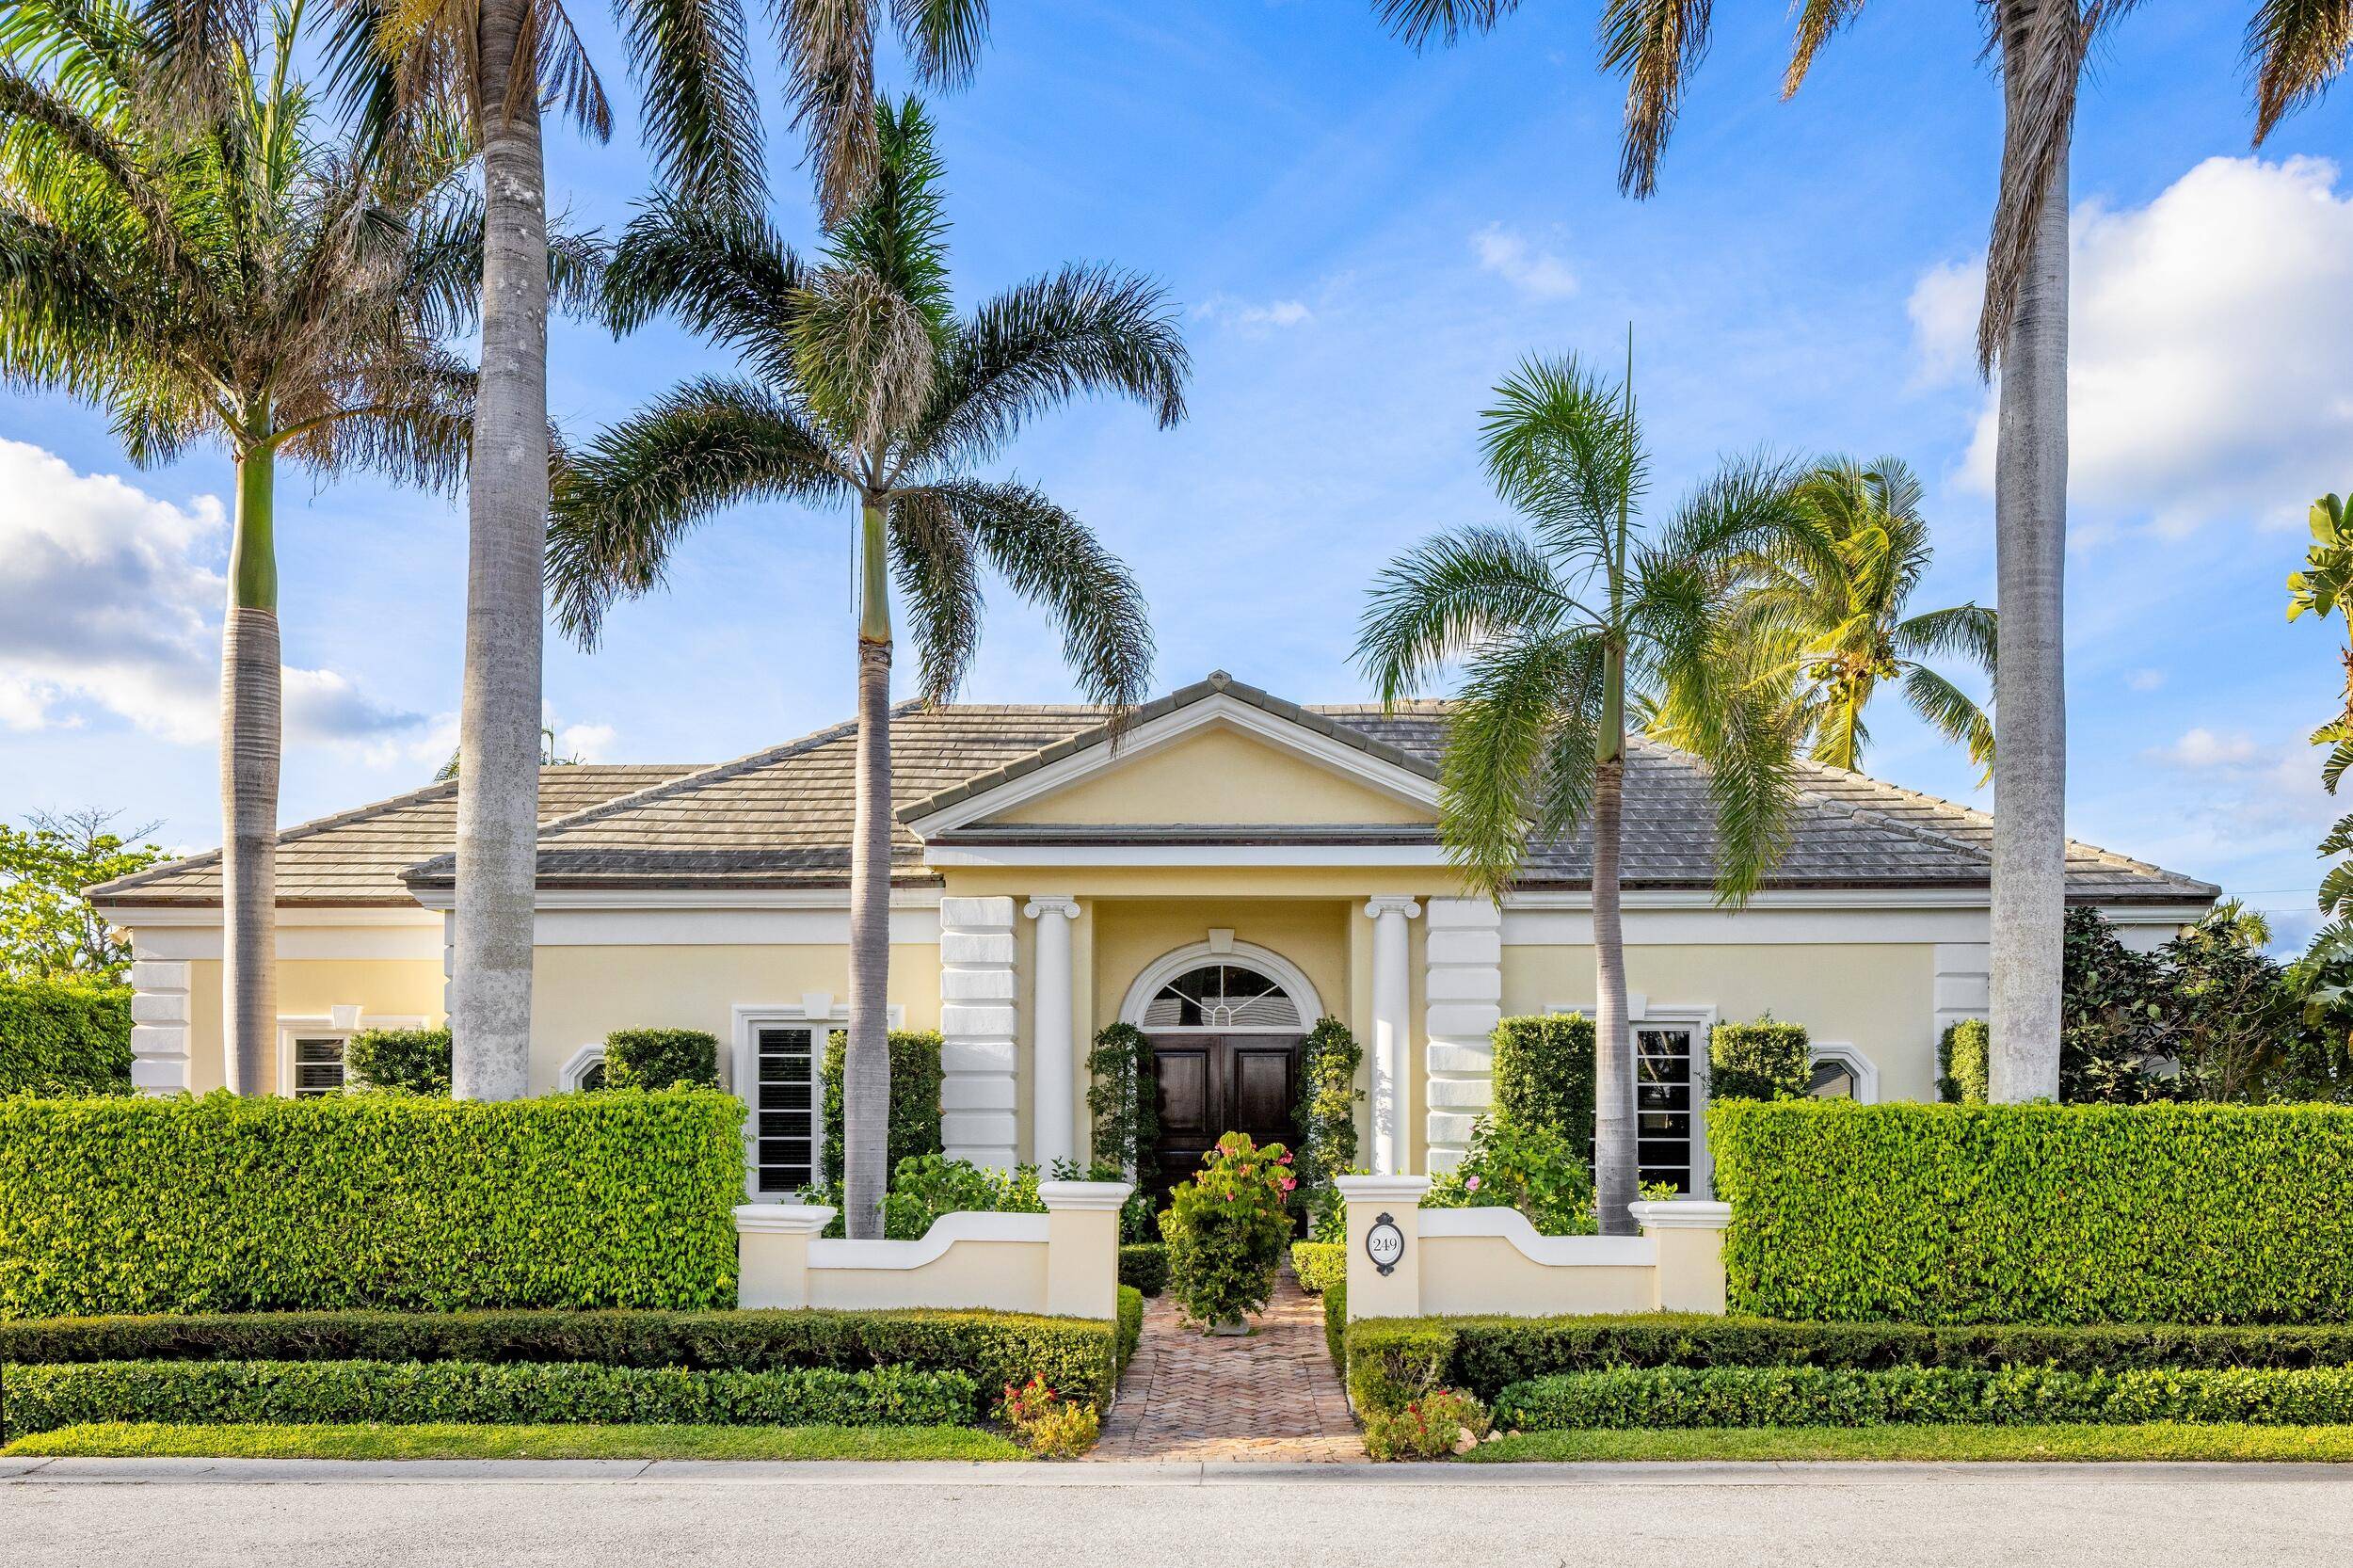 This one story North End Palm Beach home features five bedrooms, a chef's kitchen, formal dining room, and elegant living areas with high ceilings and hardwood floors throughout.